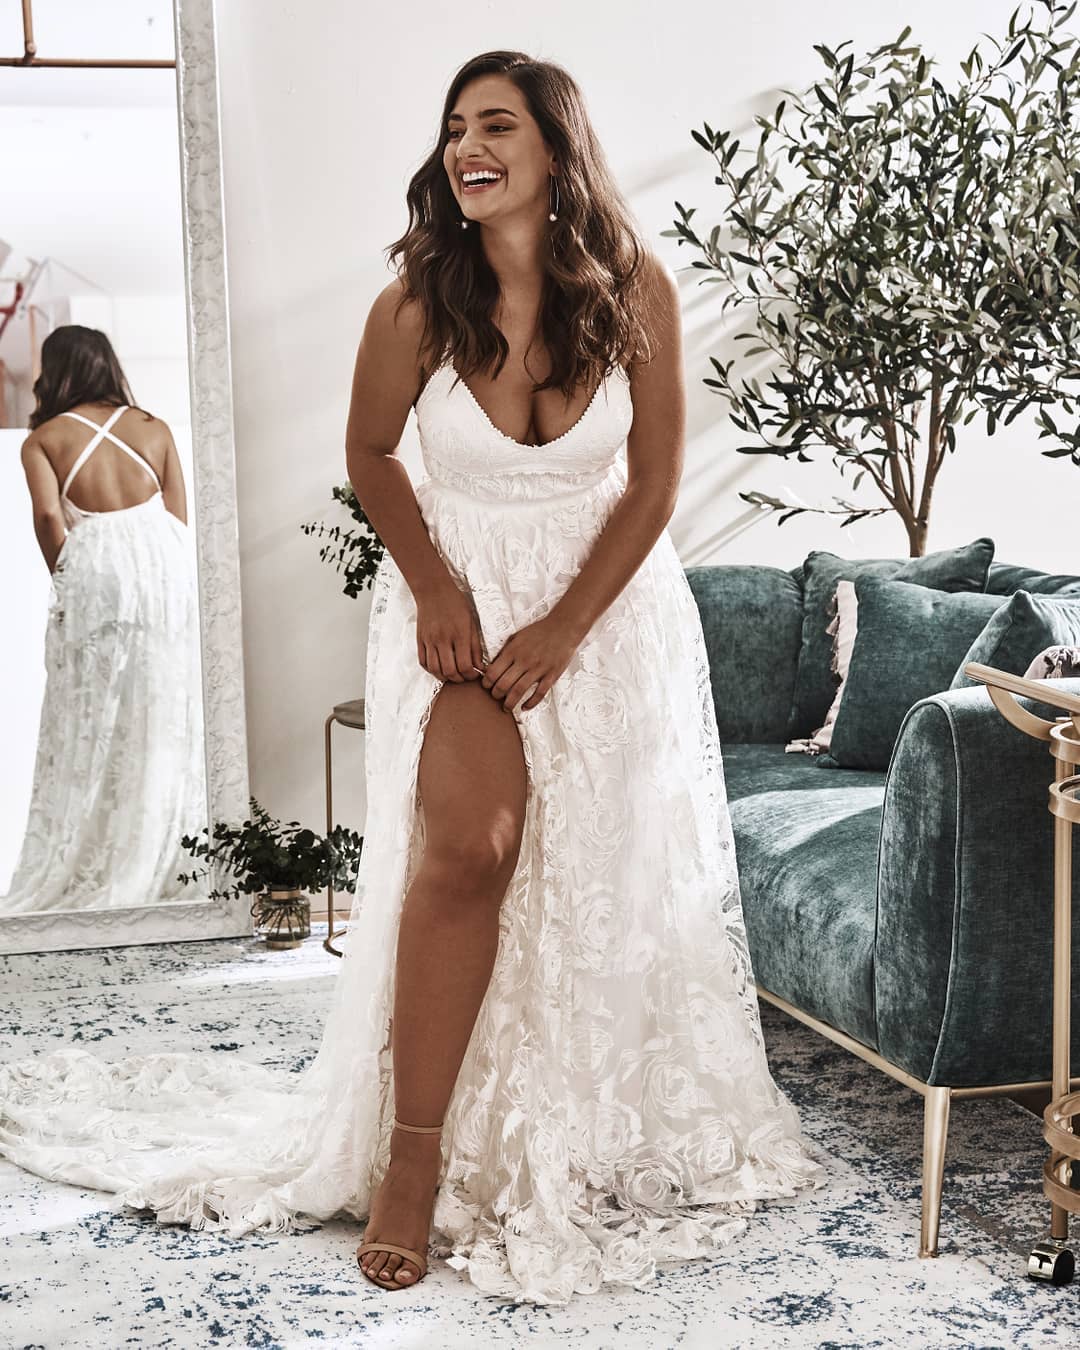 10 Statement Wedding Dresses You Never Knew You Loved ⋆ Ruffled